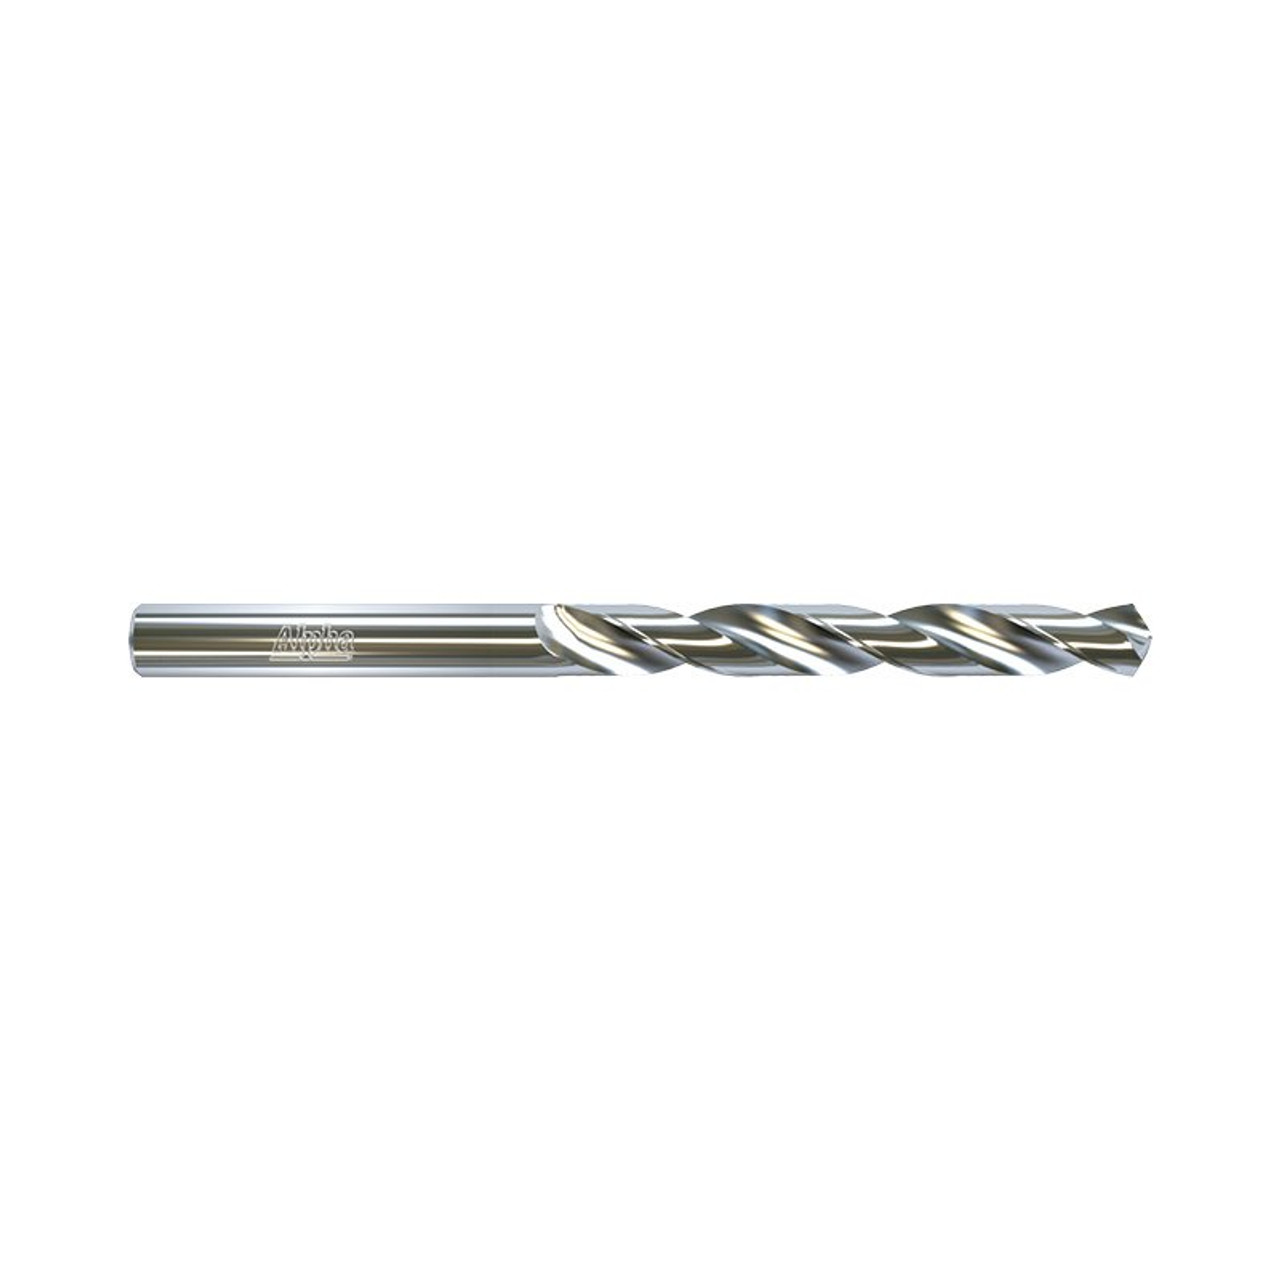 9.0Mm Jobber Drill Bit Carded - Silver Series